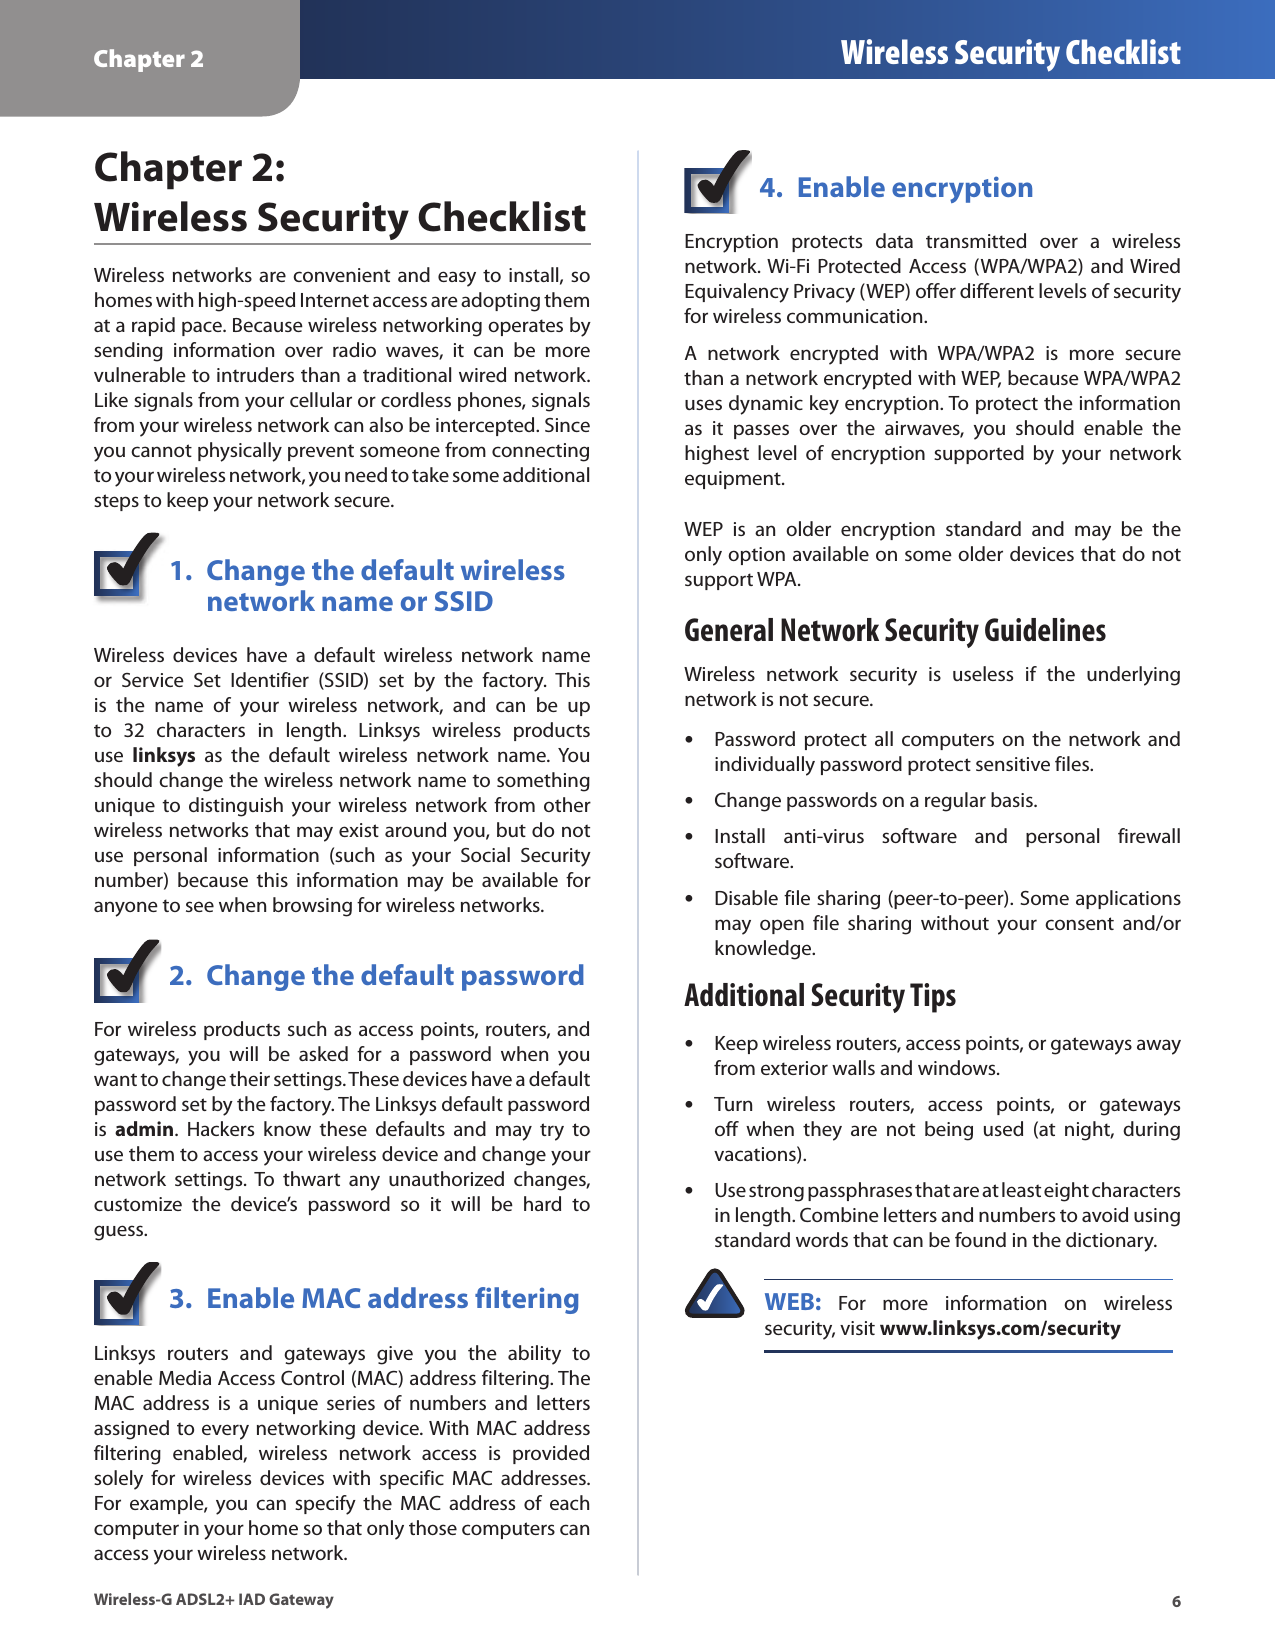 Chapter 2 Wireless Security Checklist6Wireless-G ADSL2+ IAD GatewayChapter 2:  Wireless Security ChecklistWireless networks are convenient  and easy to install, so homes with high-speed Internet access are adopting them at a rapid pace. Because wireless networking operates by sending  information  over  radio  waves,  it  can  be  more vulnerable to intruders than a traditional wired network. Like signals from your cellular or cordless phones, signals from your wireless network can also be intercepted. Since you cannot physically prevent someone from connecting to your wireless network, you need to take some additional steps to keep your network secure. 1.  Change the default wireless    network name or SSIDWireless  devices  have  a  default  wireless  network  name or  Service  Set  Identifier  (SSID)  set  by  the  factory.  This is  the  name  of  your  wireless  network,  and  can  be  up to  32  characters  in  length.  Linksys  wireless  products use  linksys  as  the  default  wireless  network  name.  You should change the wireless network name to something unique  to  distinguish  your  wireless  network  from  other wireless networks that may exist around you, but do not use  personal  information  (such  as  your  Social  Security number)  because  this  information  may  be  available  for anyone to see when browsing for wireless networks. 2.  Change the default passwordFor wireless products such as access points, routers, and gateways,  you  will  be  asked  for  a  password  when  you want to change their settings. These devices have a default password set by the factory. The Linksys default password is  admin.  Hackers  know  these  defaults  and  may  try  to use them to access your wireless device and change your network  settings. To  thwart  any  unauthorized  changes, customize  the  device’s  password  so  it  will  be  hard  to guess.3.  Enable MAC address filteringLinksys  routers  and  gateways  give  you  the  ability  to enable Media Access Control (MAC) address filtering. The MAC  address  is  a  unique  series  of  numbers  and  letters assigned to every networking device. With MAC address filtering  enabled,  wireless  network  access  is  provided solely  for  wireless  devices  with  specific  MAC  addresses. For  example,  you  can  specify  the  MAC  address  of  each computer in your home so that only those computers can access your wireless network. 4.  Enable encryptionEncryption  protects  data  transmitted  over  a  wireless network. Wi-Fi  Protected Access (WPA/WPA2) and Wired Equivalency Privacy (WEP) offer different levels of security for wireless communication.A  network  encrypted  with  WPA/WPA2  is  more  secure than a network encrypted with WEP, because WPA/WPA2 uses dynamic key encryption. To protect the information as  it  passes  over  the  airwaves,  you  should  enable  the highest  level  of  encryption  supported  by  your  network equipment. WEP  is  an  older  encryption  standard  and  may  be  the only option available on some older devices that do not support WPA.General Network Security GuidelinesWireless  network  security  is  useless  if  the  underlying network is not secure. Password protect  all  computers  on  the  network  and individually password protect sensitive files.Change passwords on a regular basis.Install  anti-virus  software  and  personal  firewall software.Disable file sharing (peer-to-peer). Some applications may  open  file  sharing  without  your  consent  and/or knowledge.Additional Security TipsKeep wireless routers, access points, or gateways away from exterior walls and windows.Turn  wireless  routers,  access  points,  or  gateways off  when  they  are  not  being  used  (at  night,  during vacations).Use strong passphrases that are at least eight characters in length. Combine letters and numbers to avoid using standard words that can be found in the dictionary. WEB:  For  more  information  on  wireless security, visit www.linksys.com/security•••••••